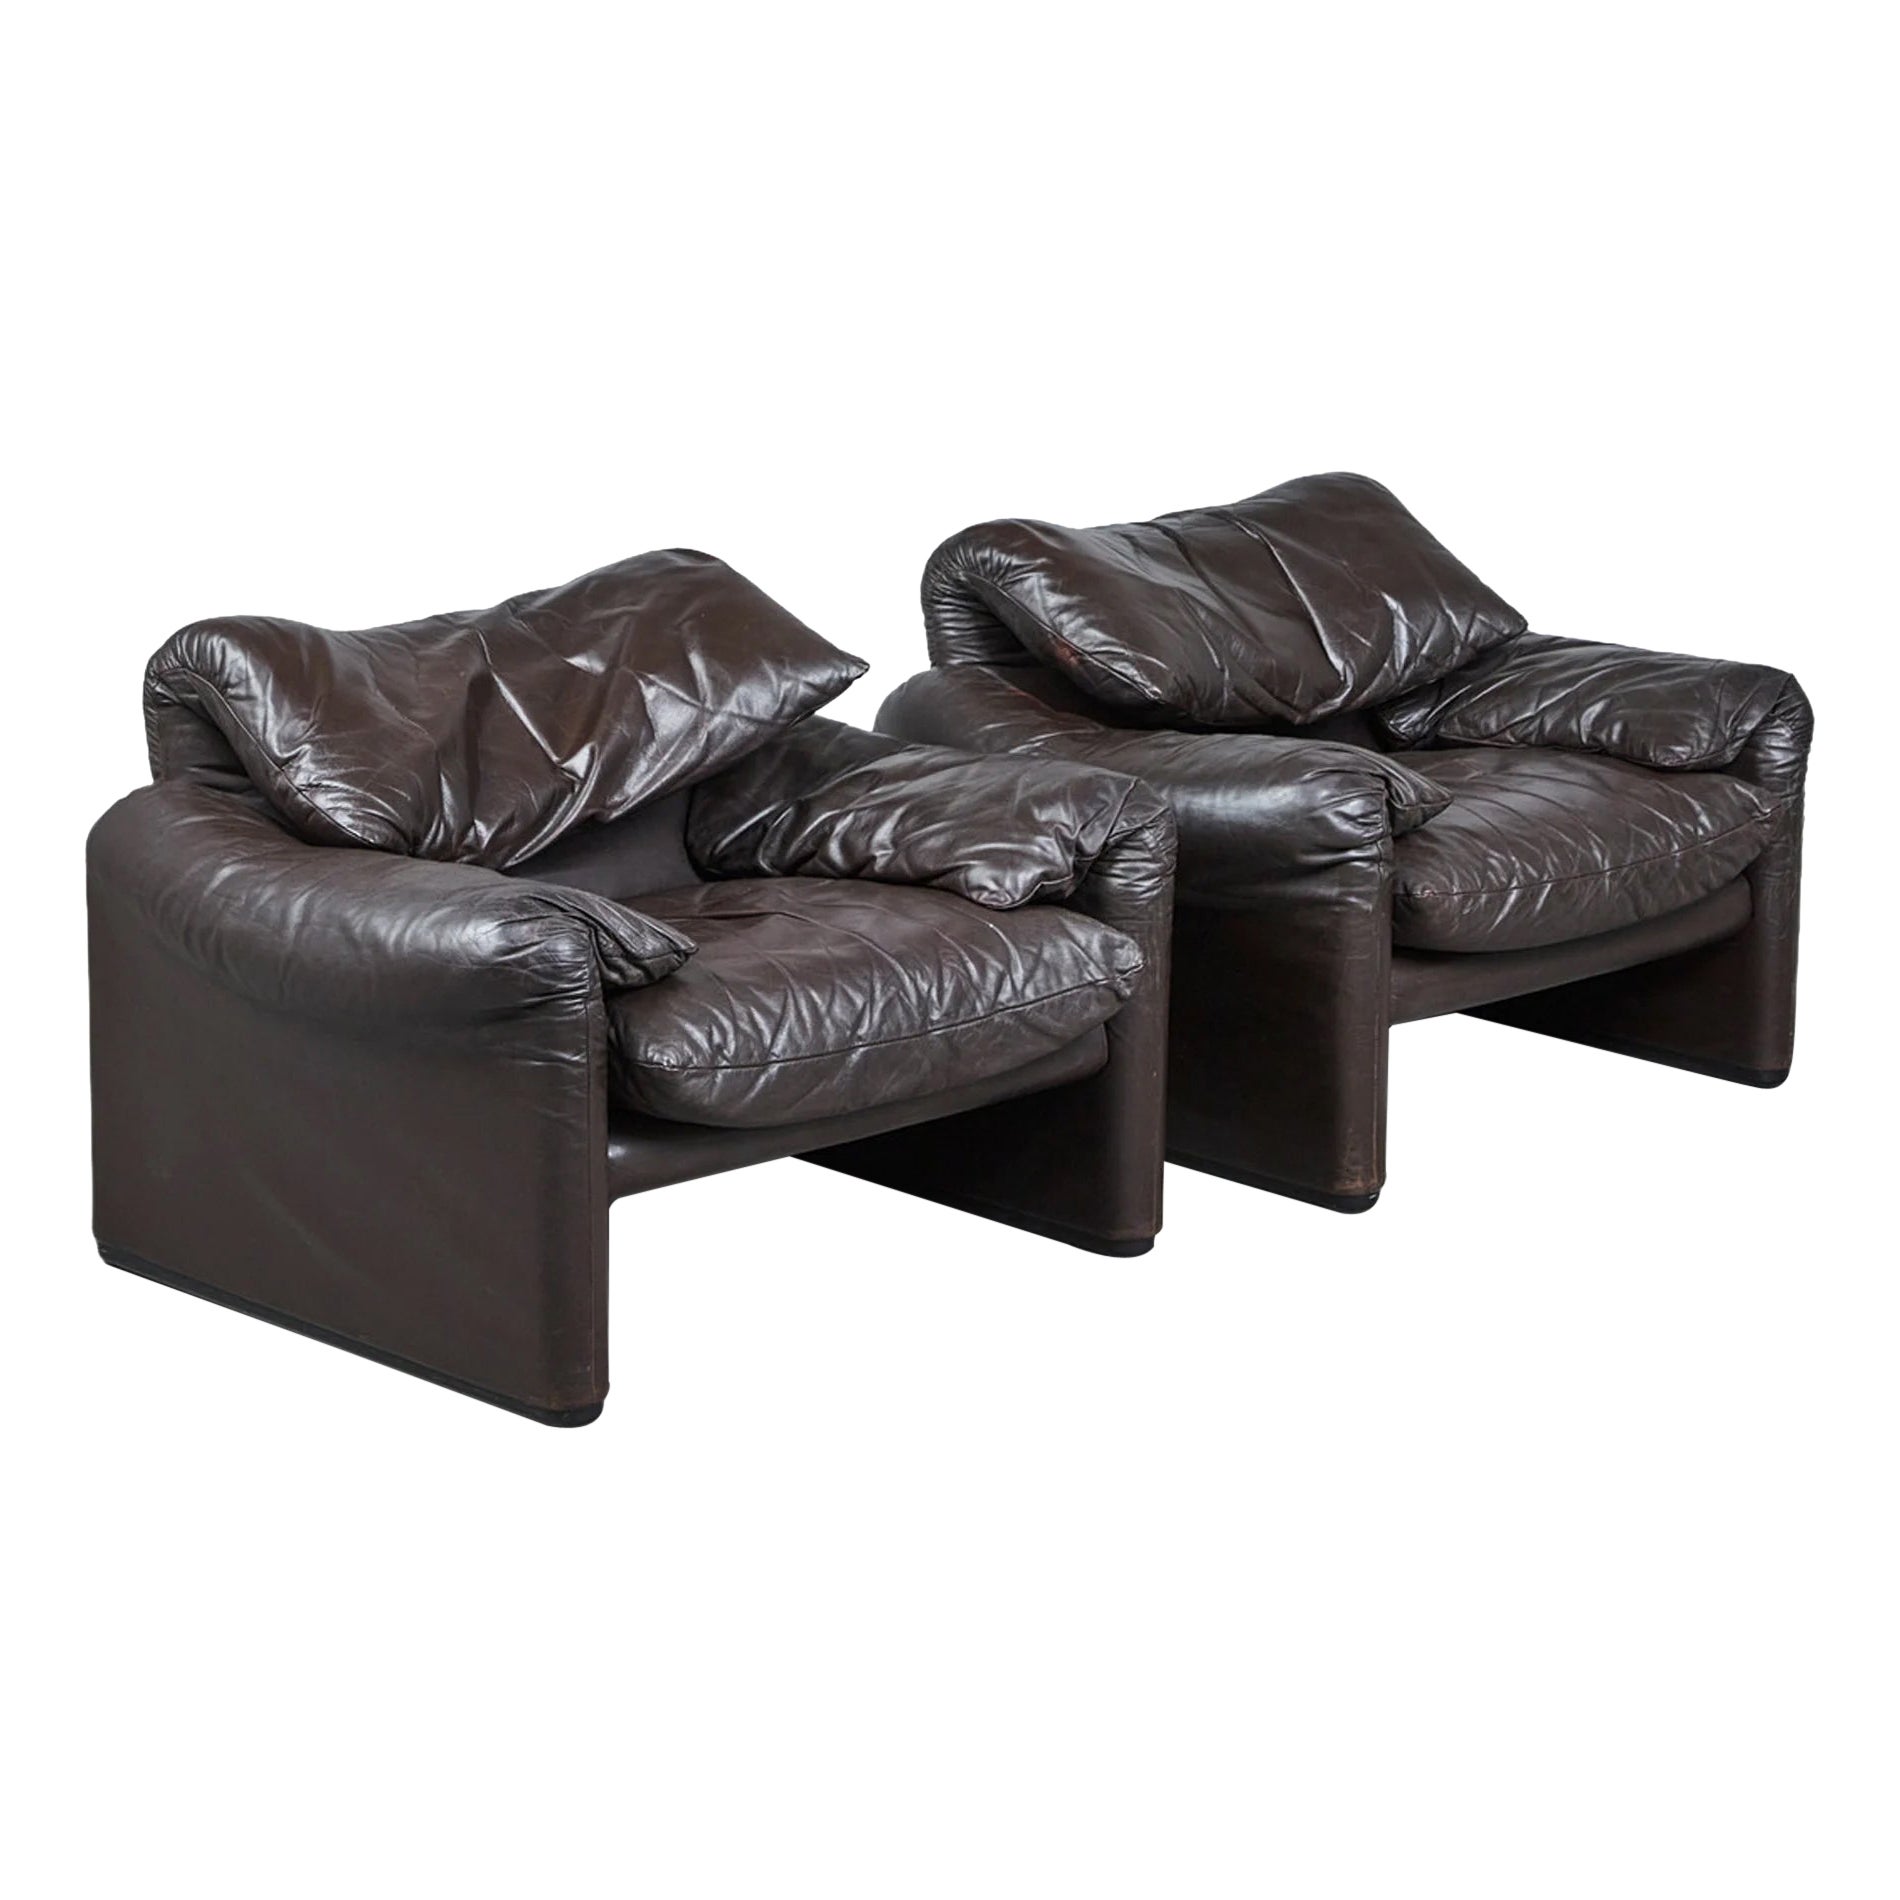 Pair of maralunga lounge chairs by vico magistretti For Sale